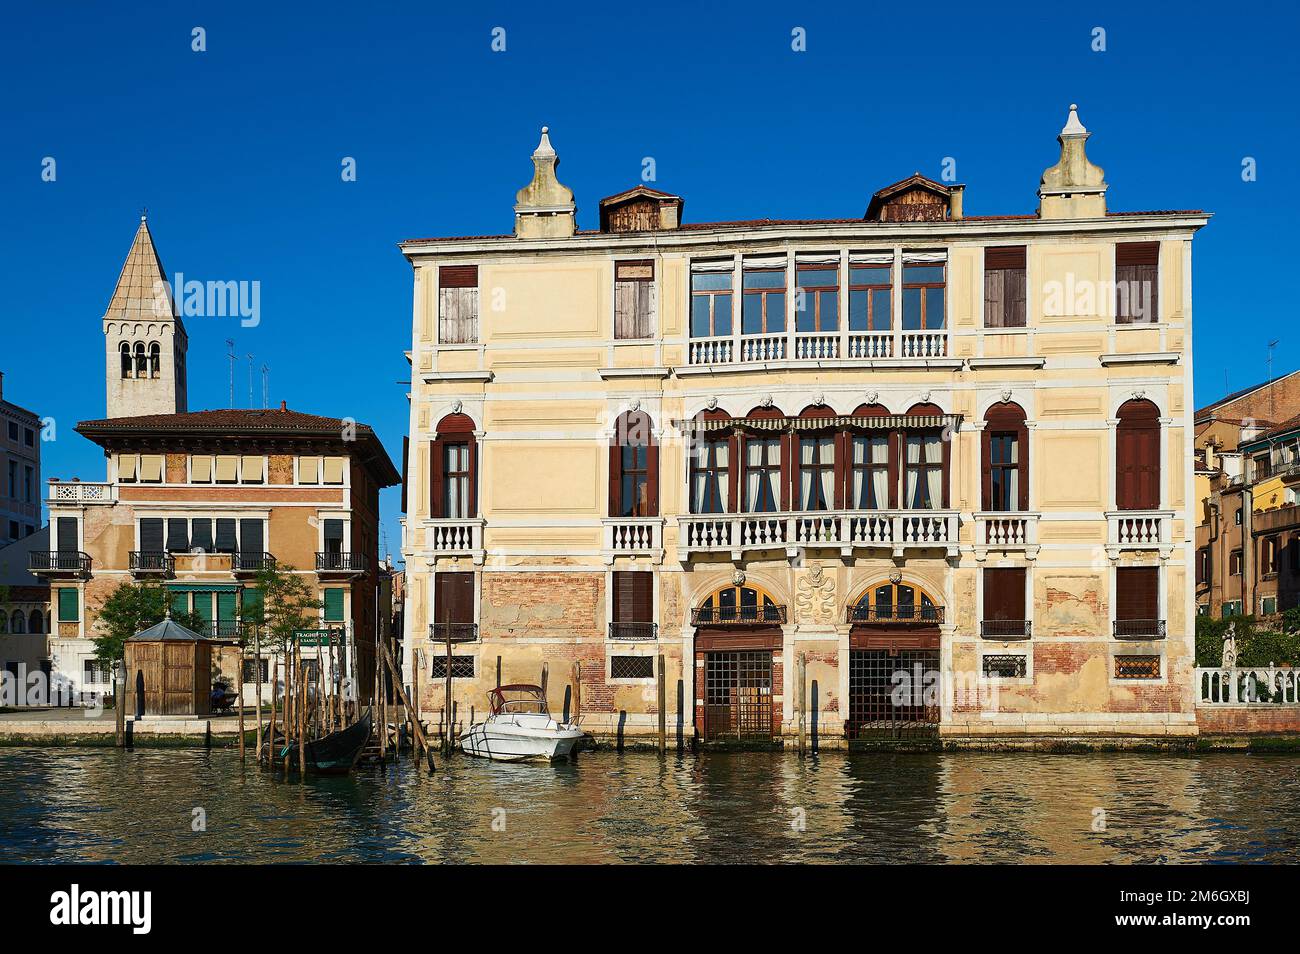 View of a typical Venetian facade with its façade damaged by the effect of water and a wooden pier for small boats Stock Photo